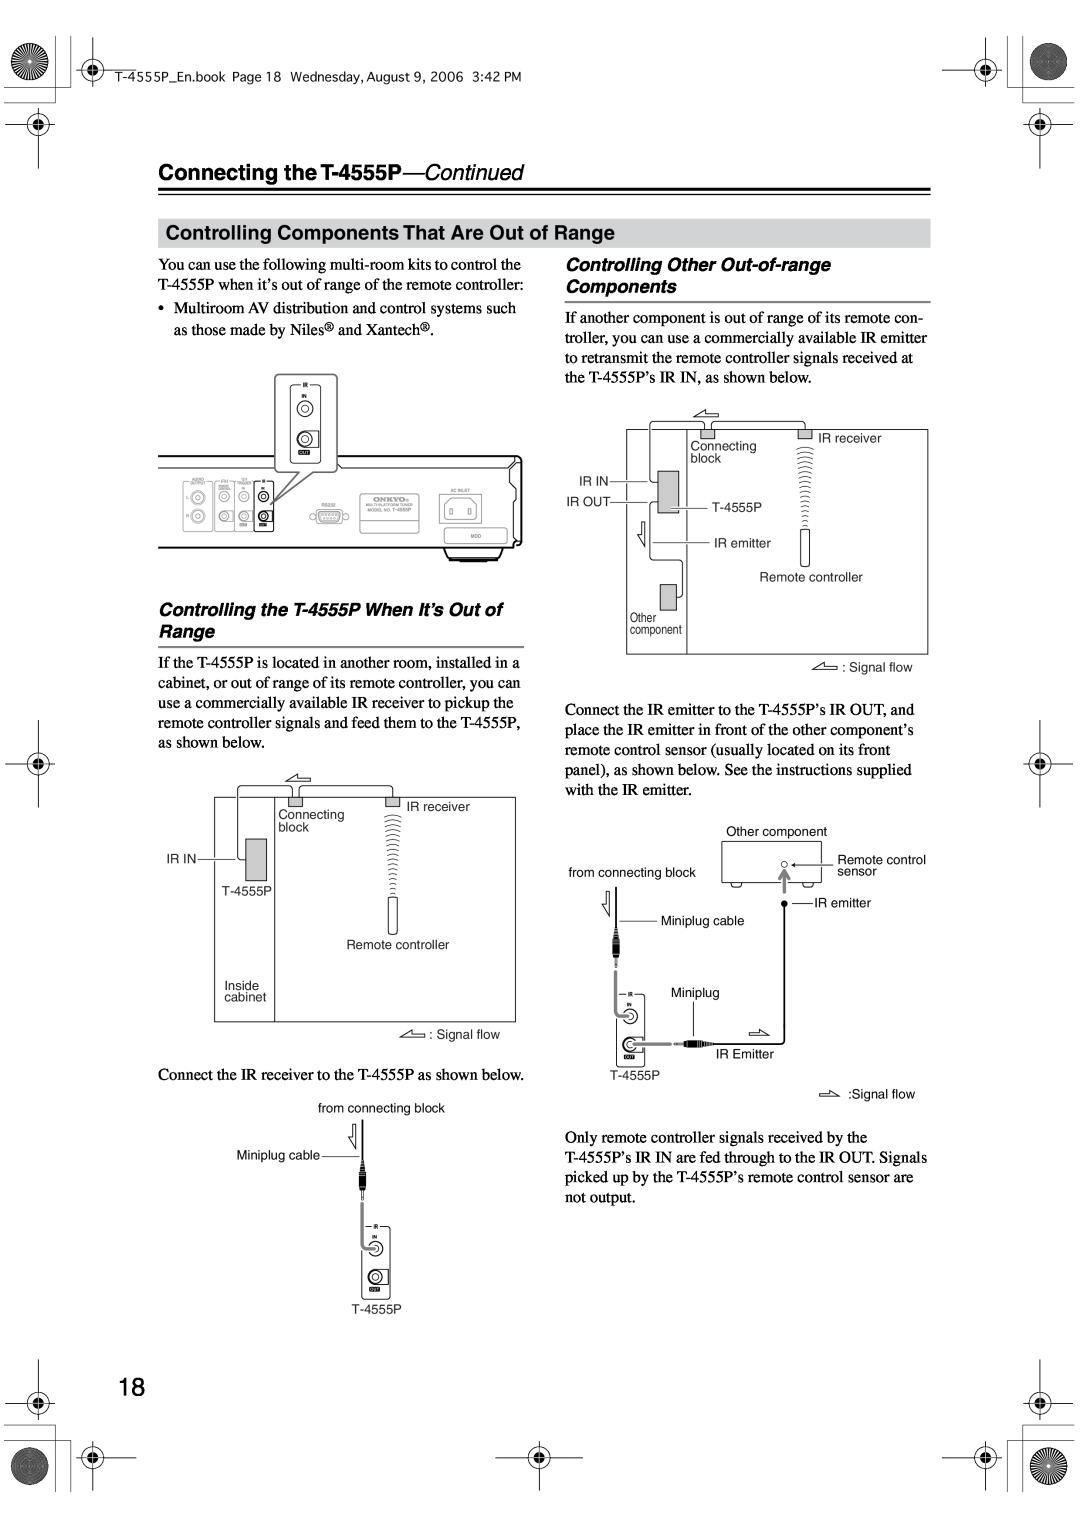 Onkyo T-4555P instruction manual Controlling Components That Are Out of Range, Controlling Other Out-of-range Components 